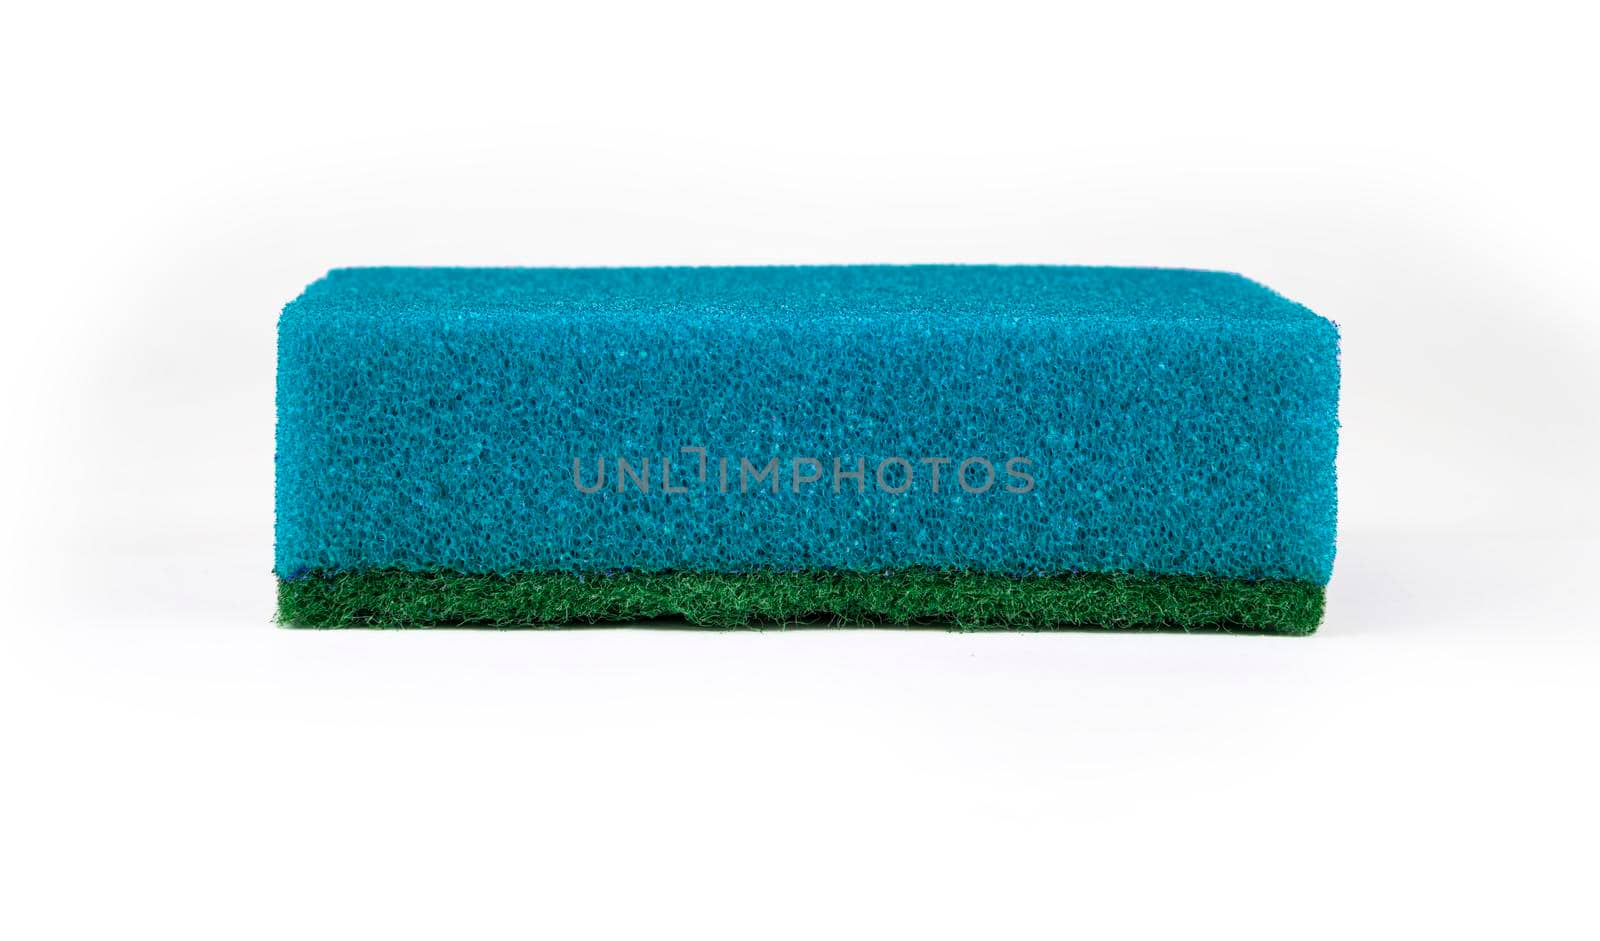 sponge for washing dishes on a white background in isolation